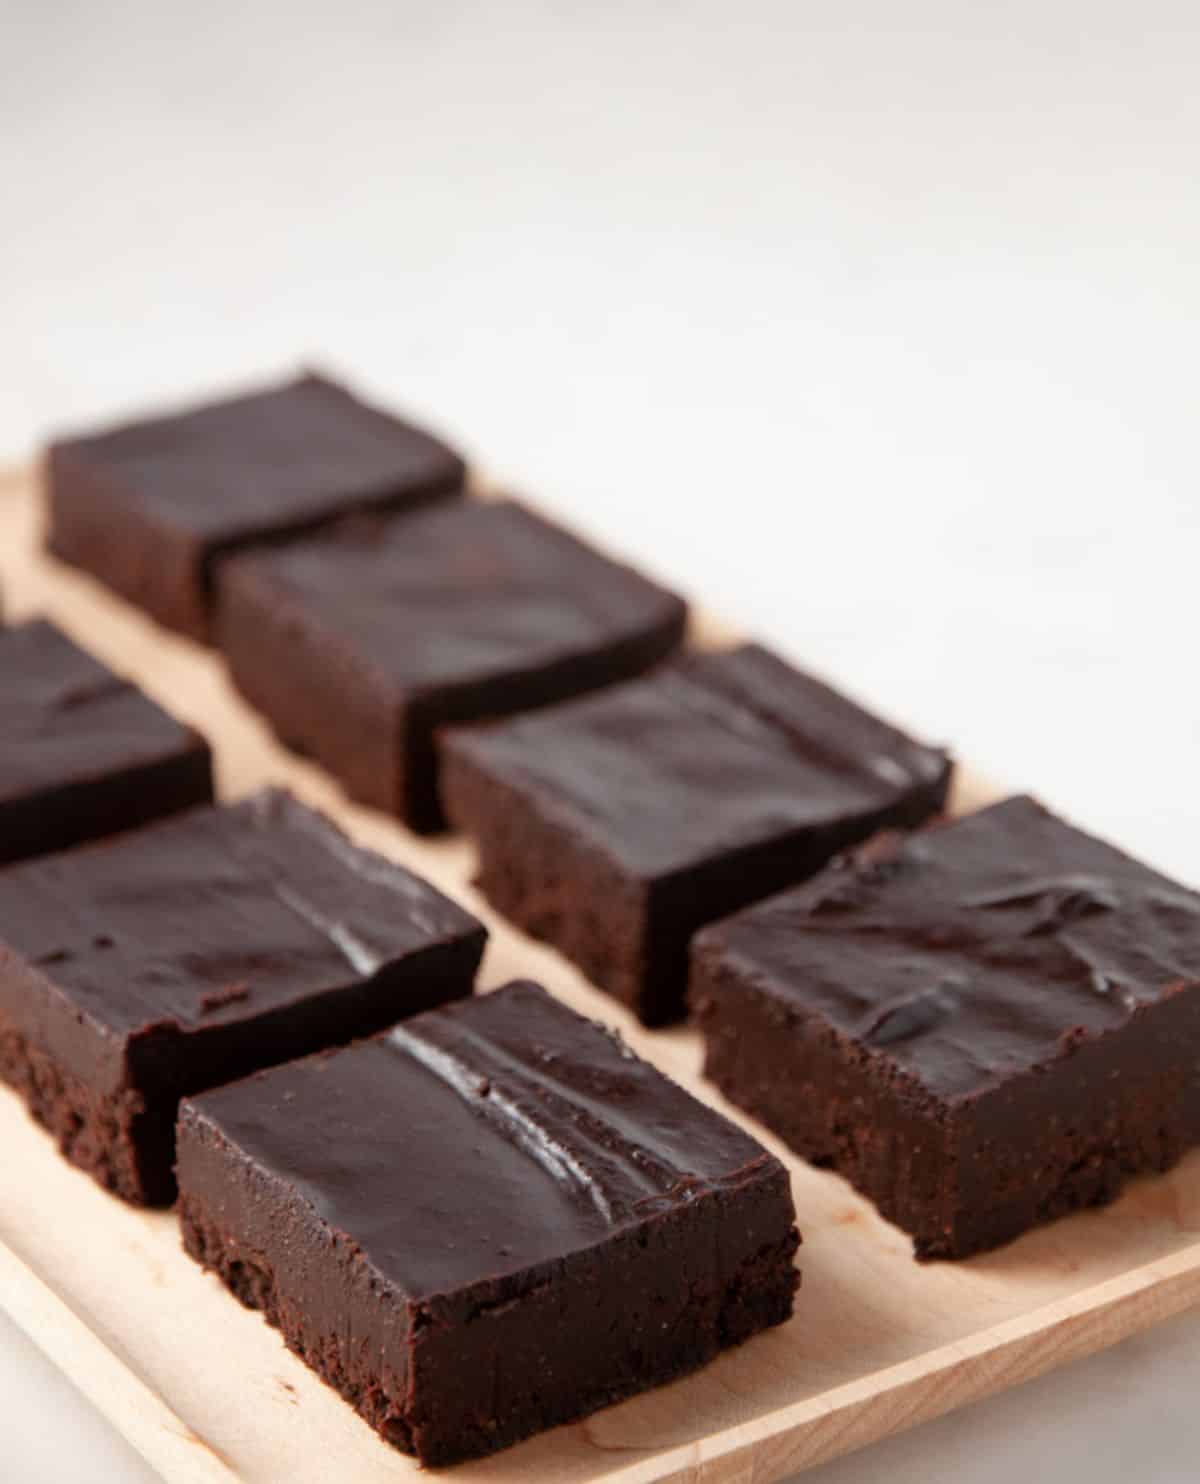 paleo chocolate fudge lined up on a cutting board